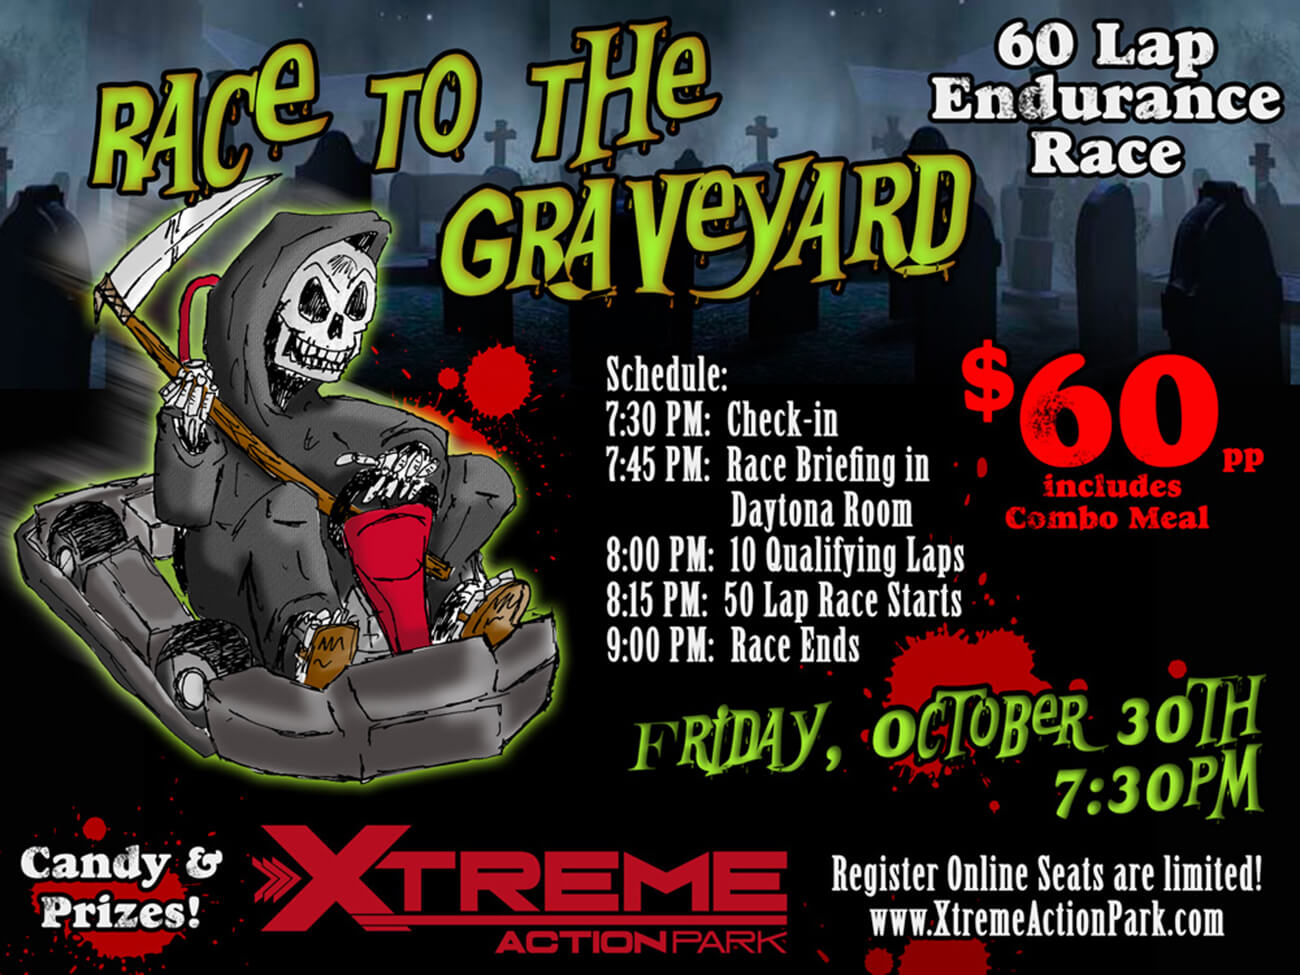 Race to the Graveyard 2015